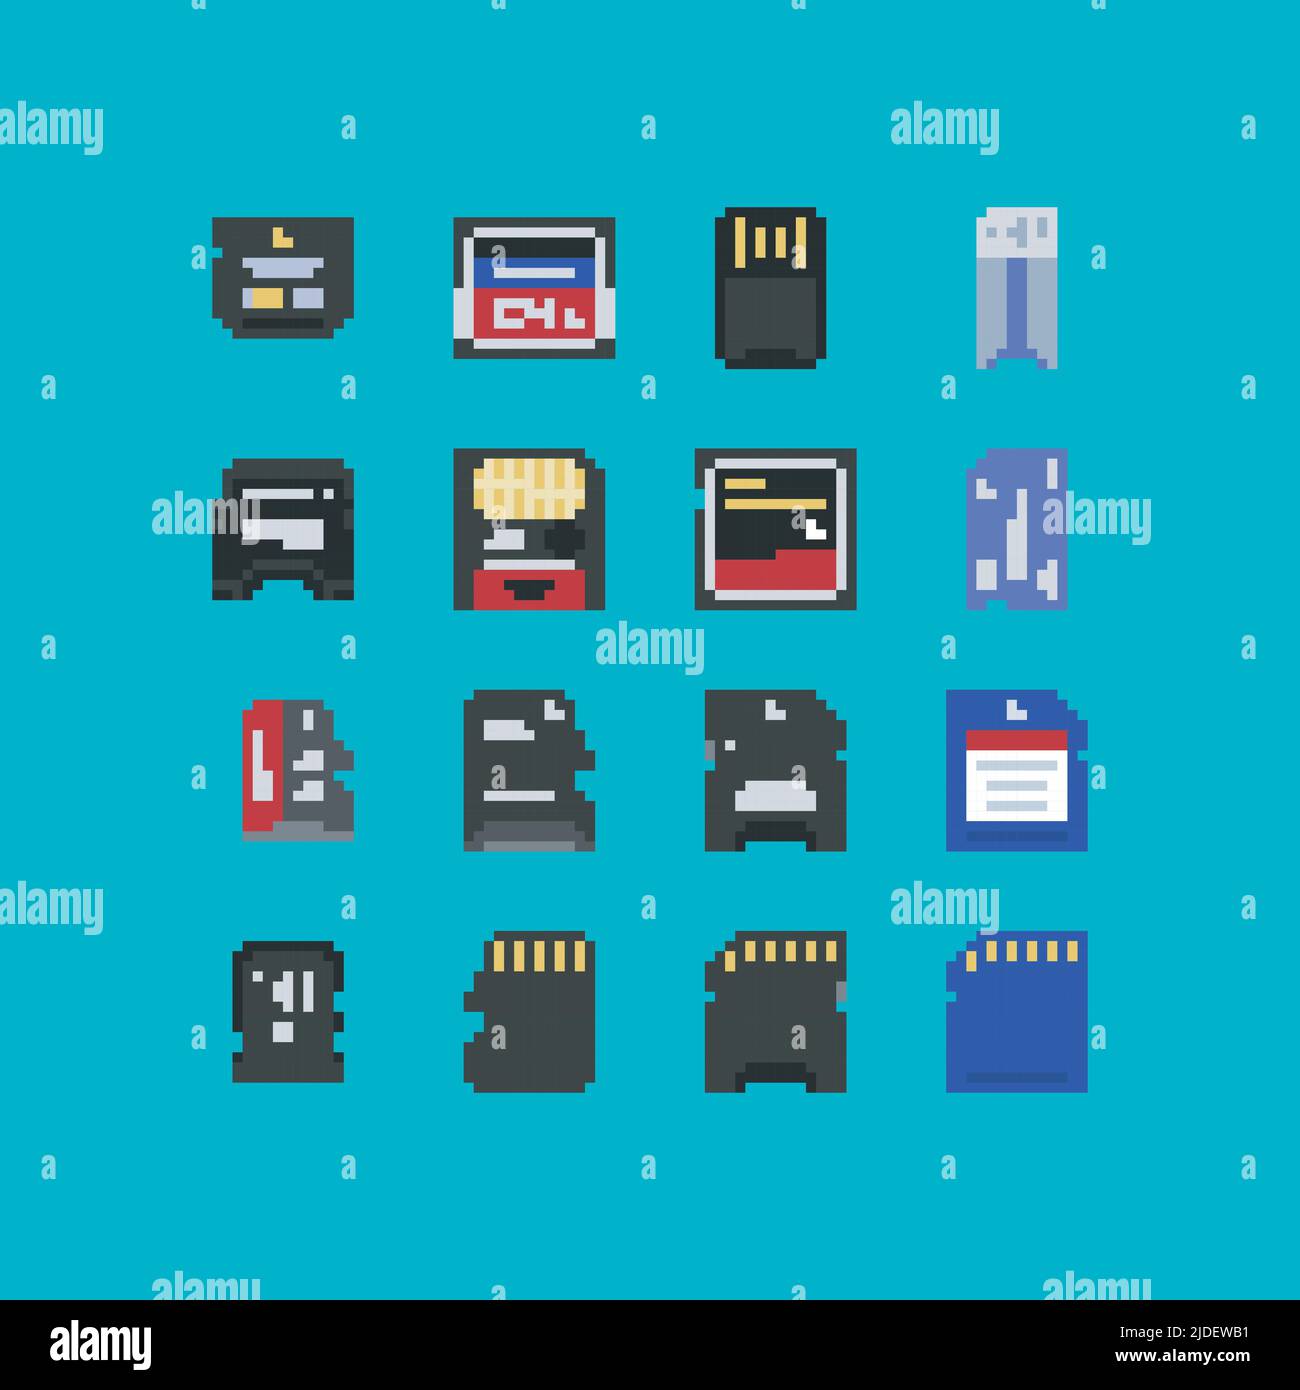 Pixel art phone and photo memory card vector 8 bit icon set on light blue background. Video game 8-bit sprite. Stock Vector